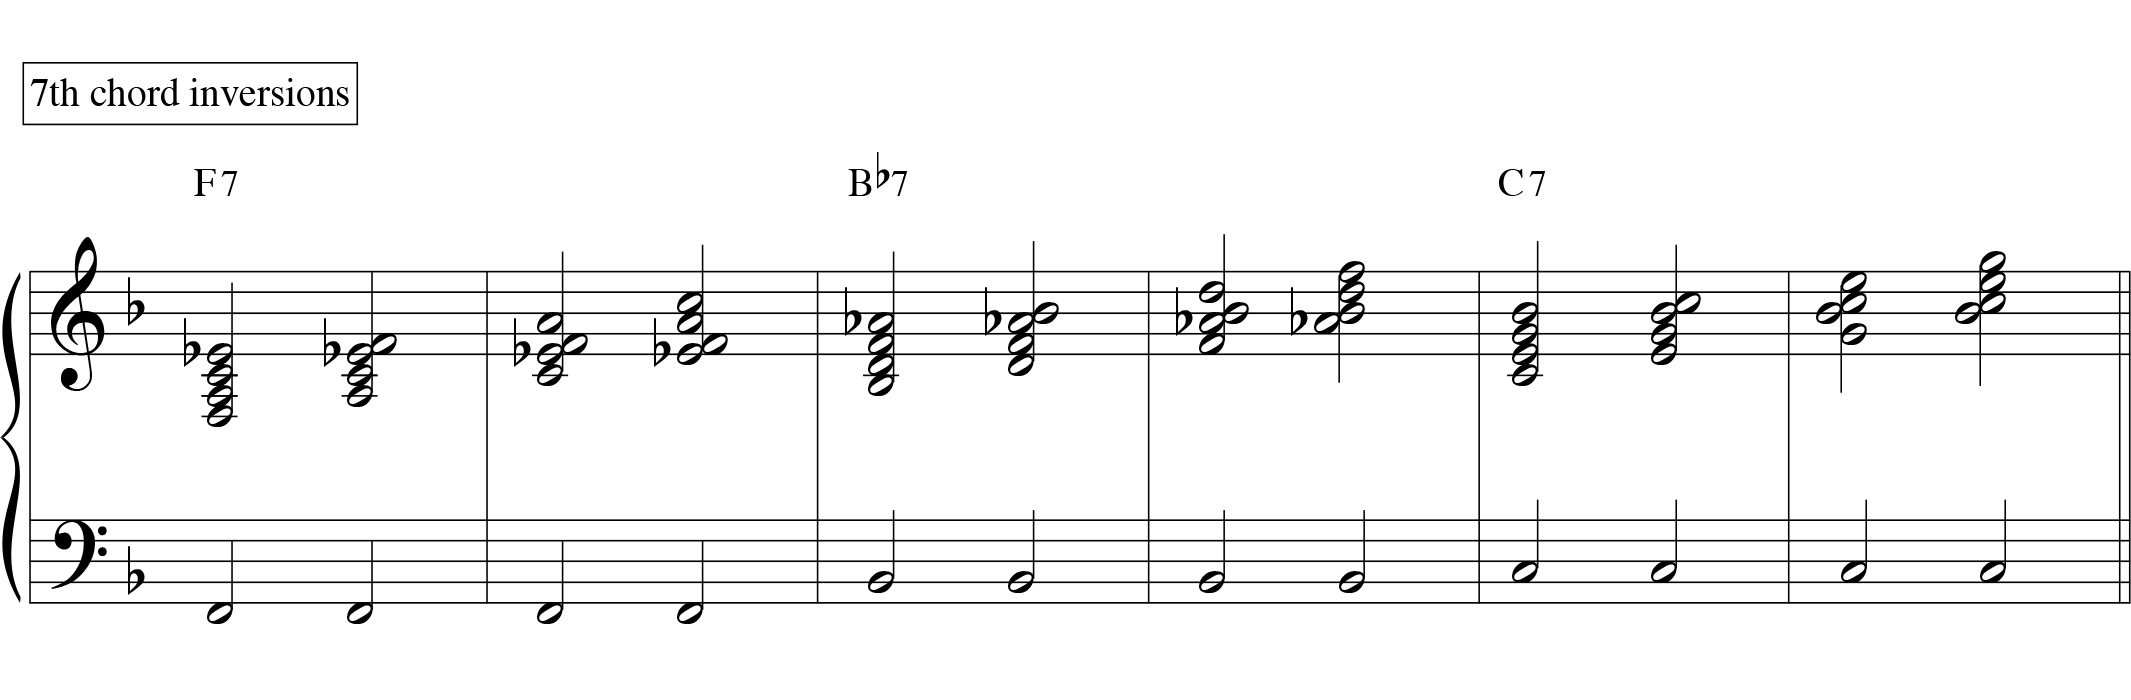 7th chord inversions for 12 bar blues